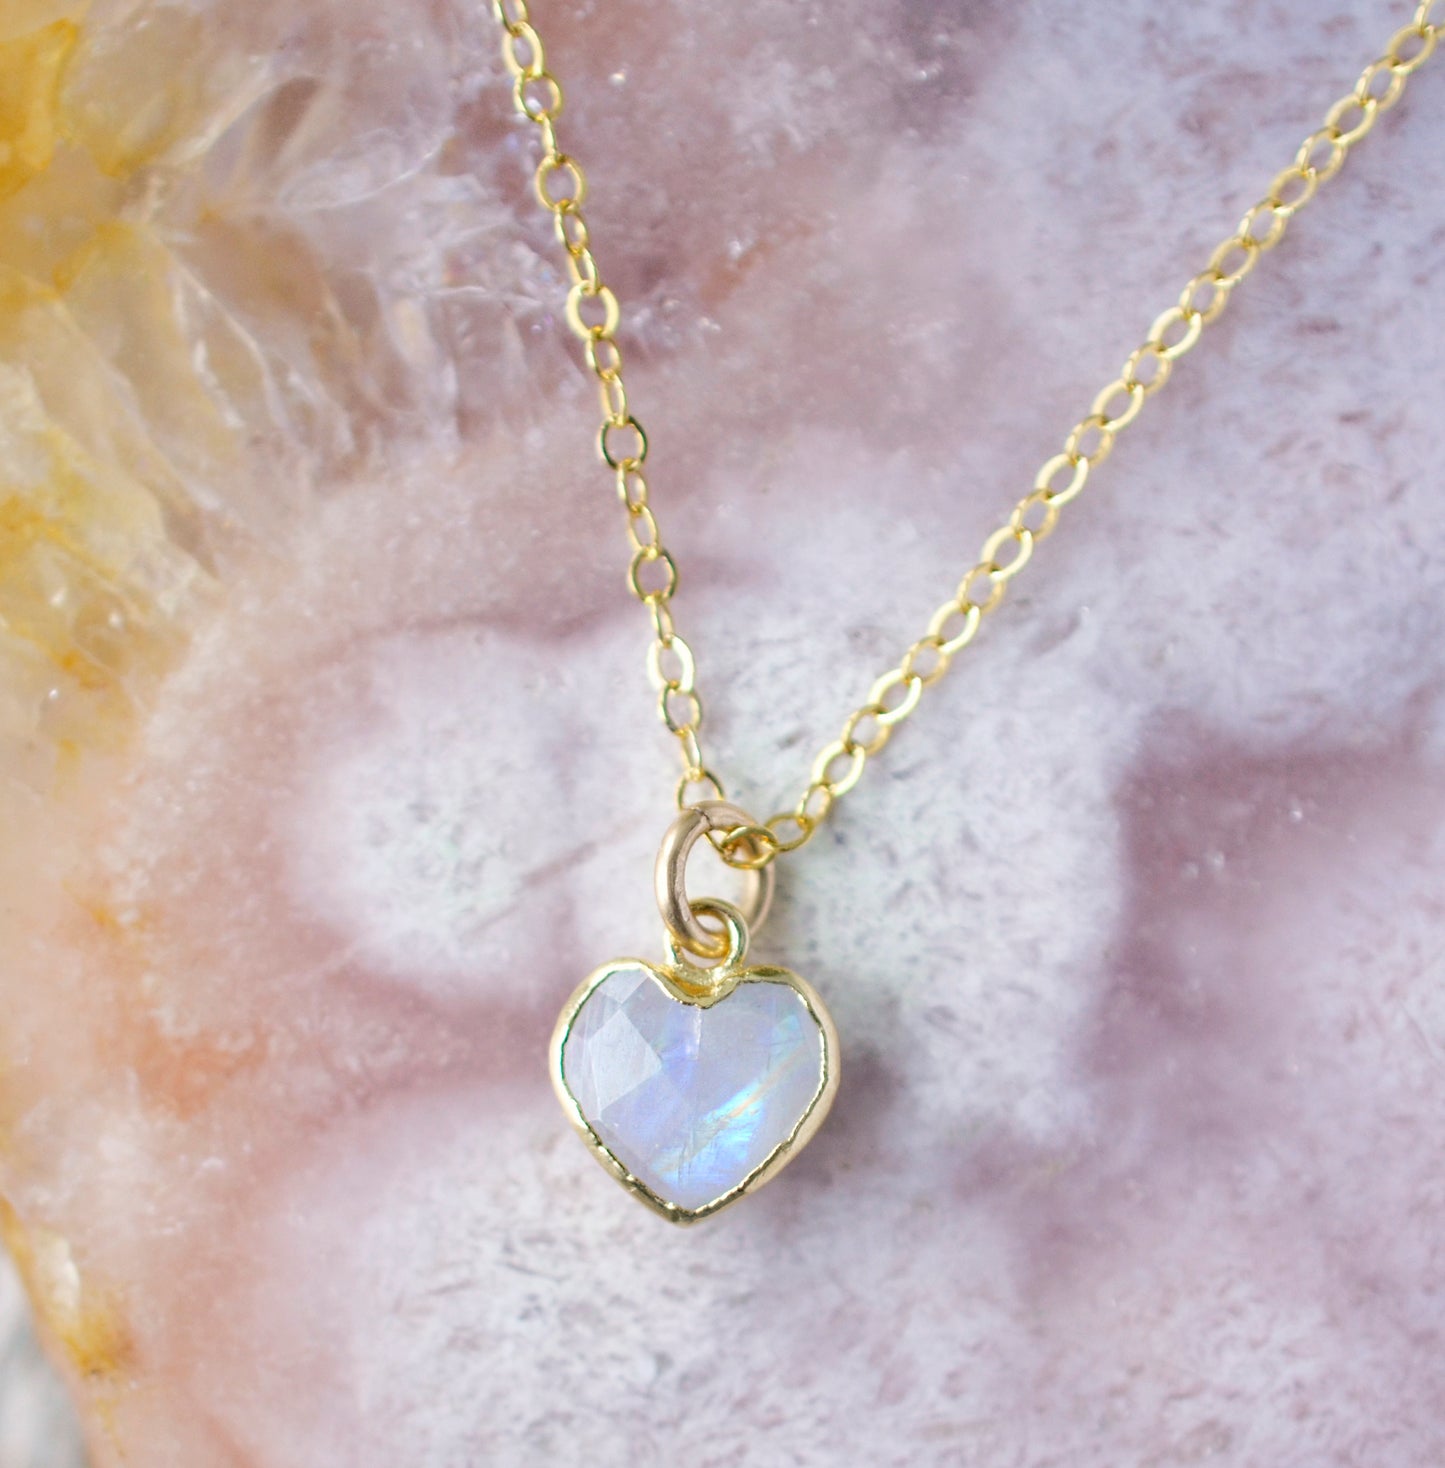 Natural rainbow moonstone heart pendant set onto a sterling silver or gold filled chain. Small stone heart pendant. 